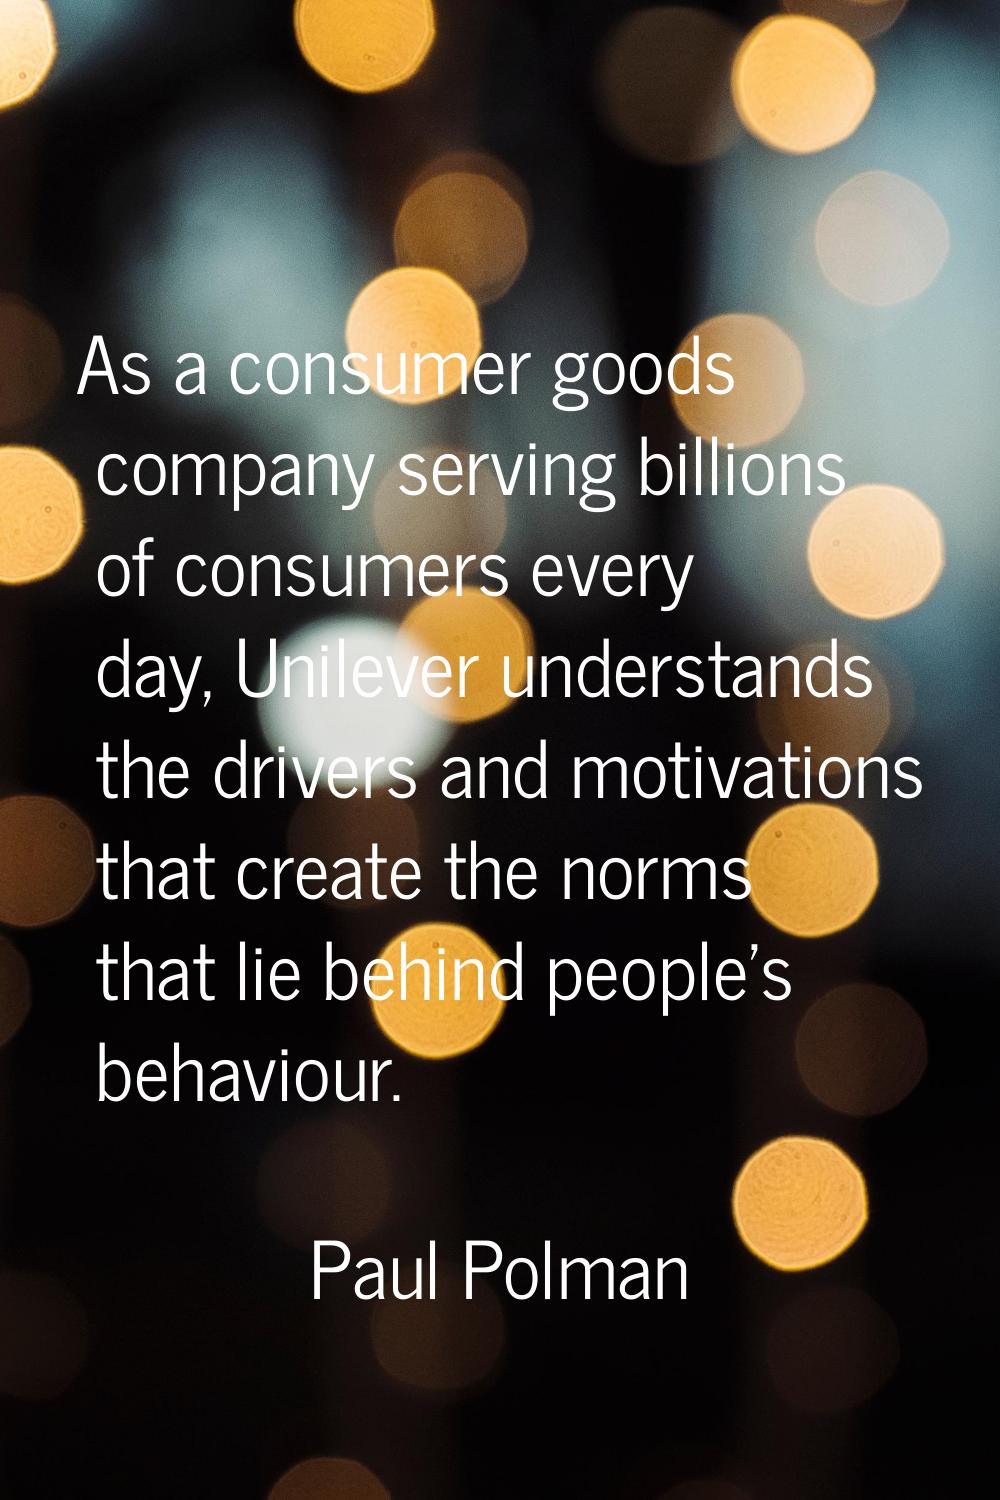 As a consumer goods company serving billions of consumers every day, Unilever understands the drive